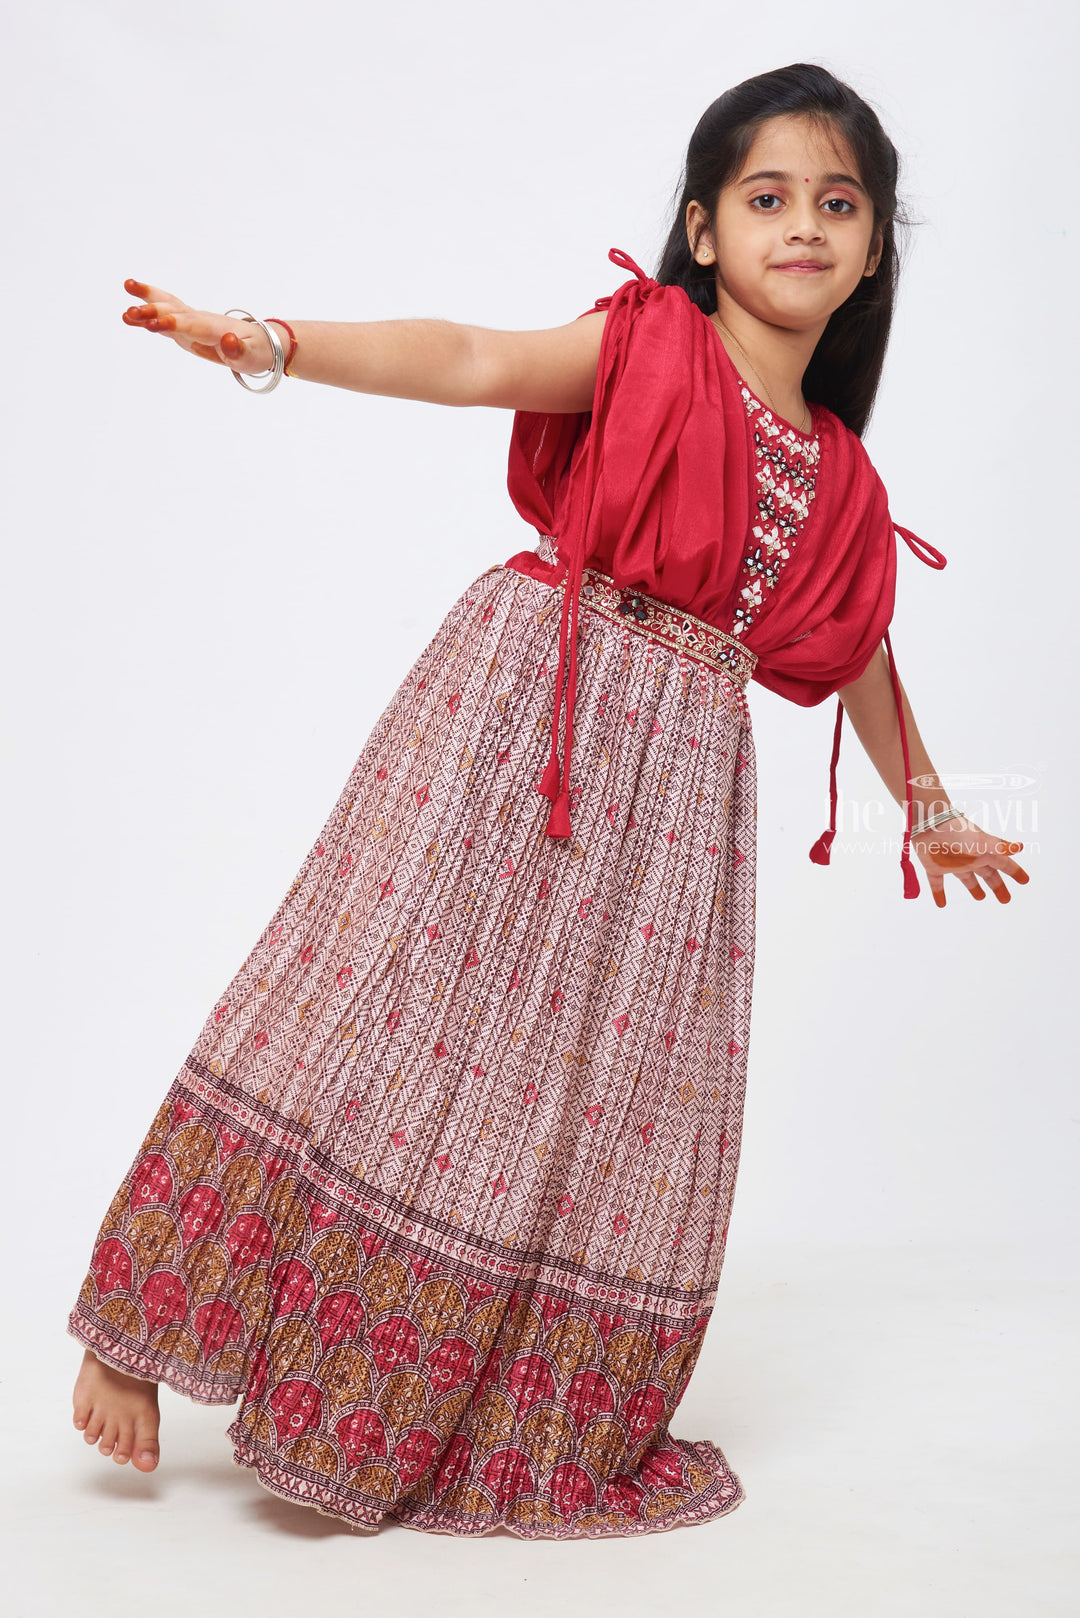 The Nesavu Girls Party Gown Regal Radiance: Puffed-Sleeve Mirror Embellished Traditional Anarkali Gown for Girls Nesavu Regal Layers: Distinctive Anarkali Dresses for Little Girls | The Nesavu